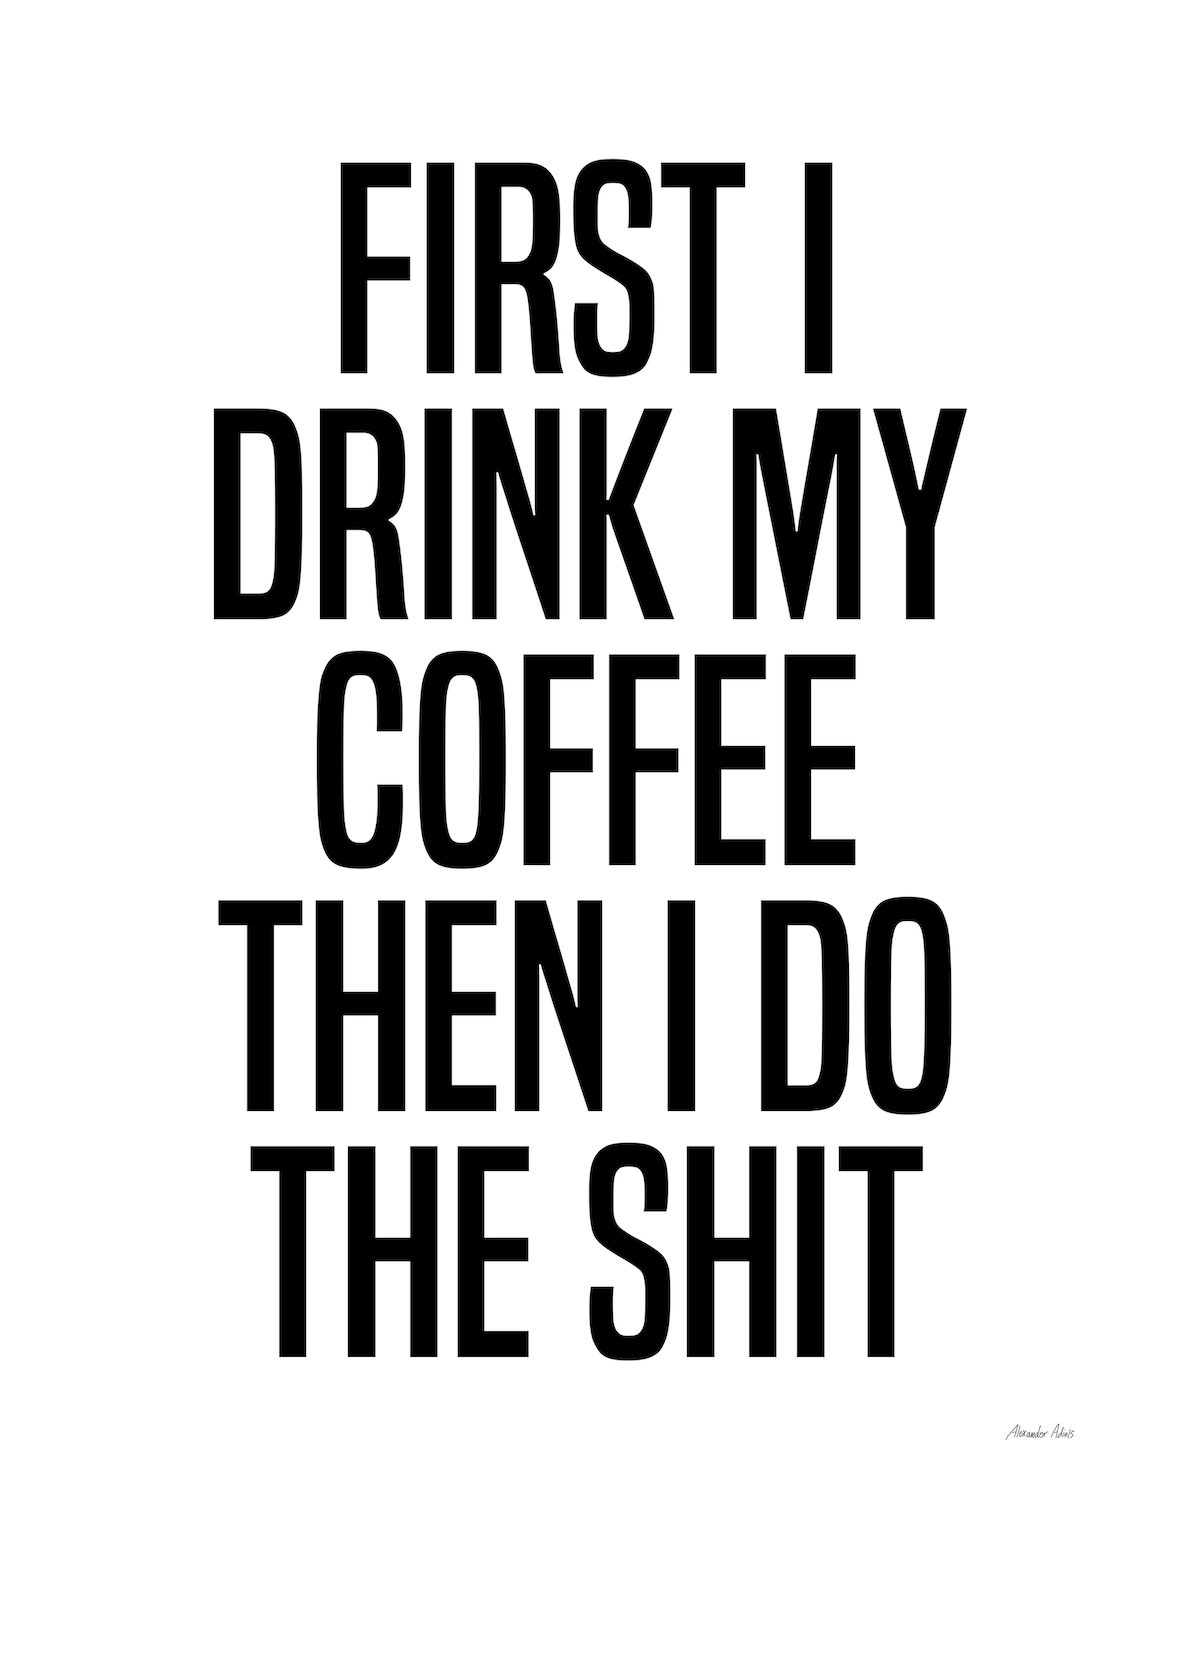 First I drink my coffee then I do the shit